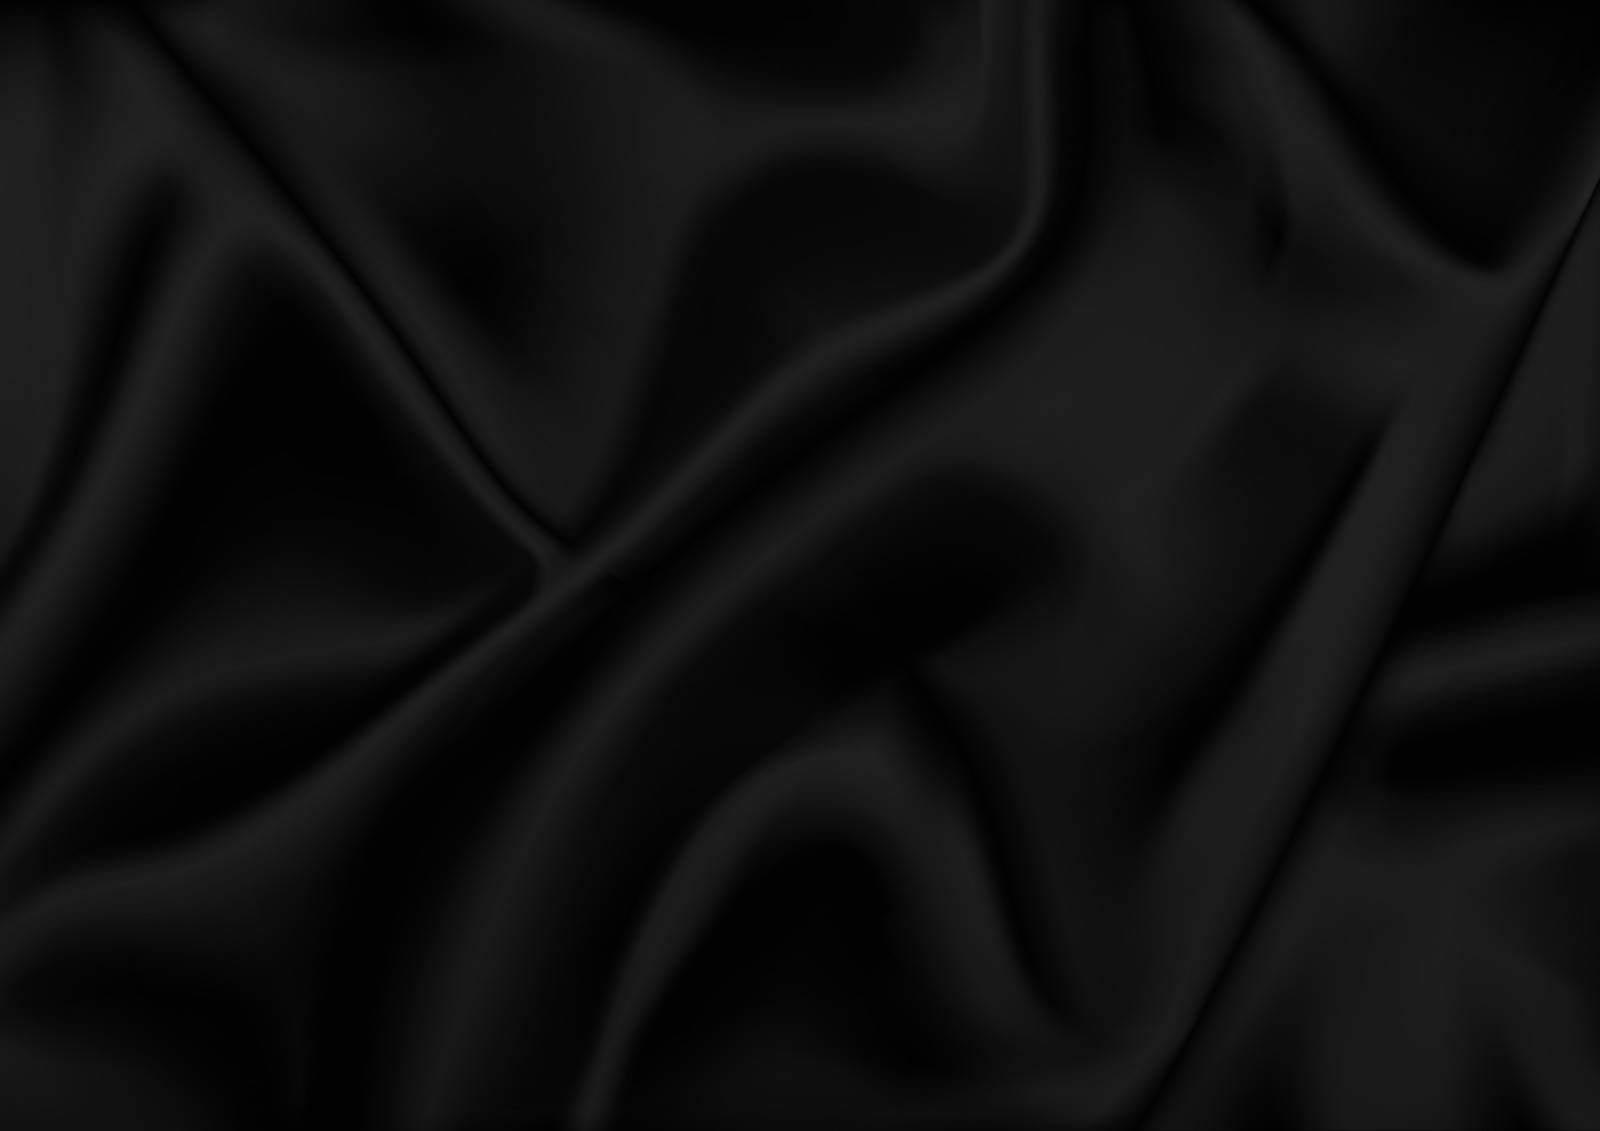 Black Satin Background - Abstract Fabric Illustration, Vector